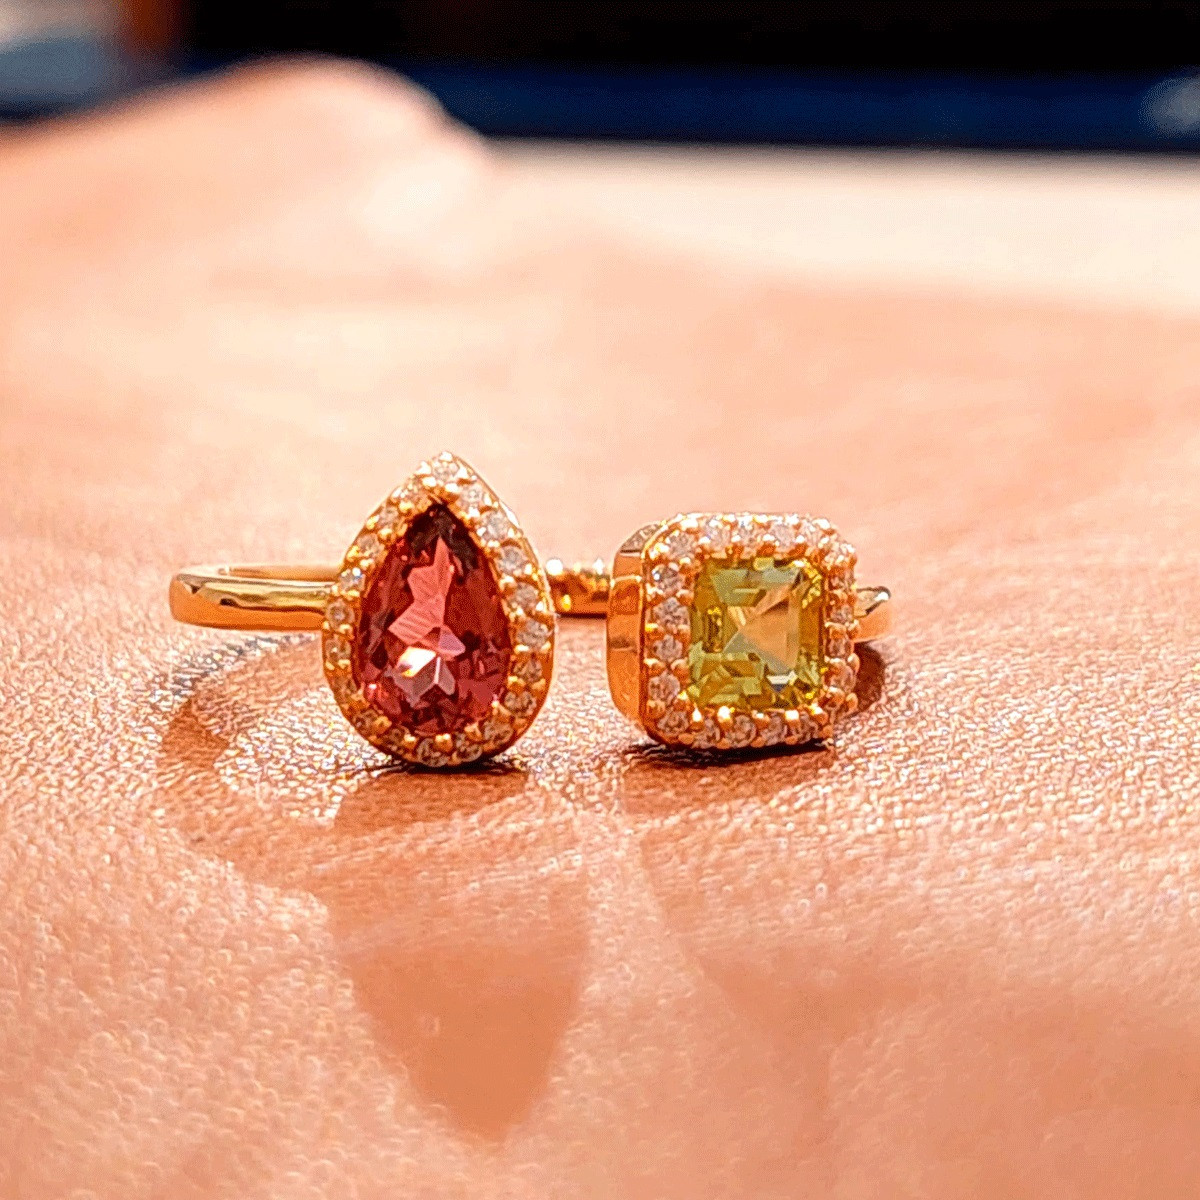 ROSE GOLD RING WITH 2 COLORED STONES